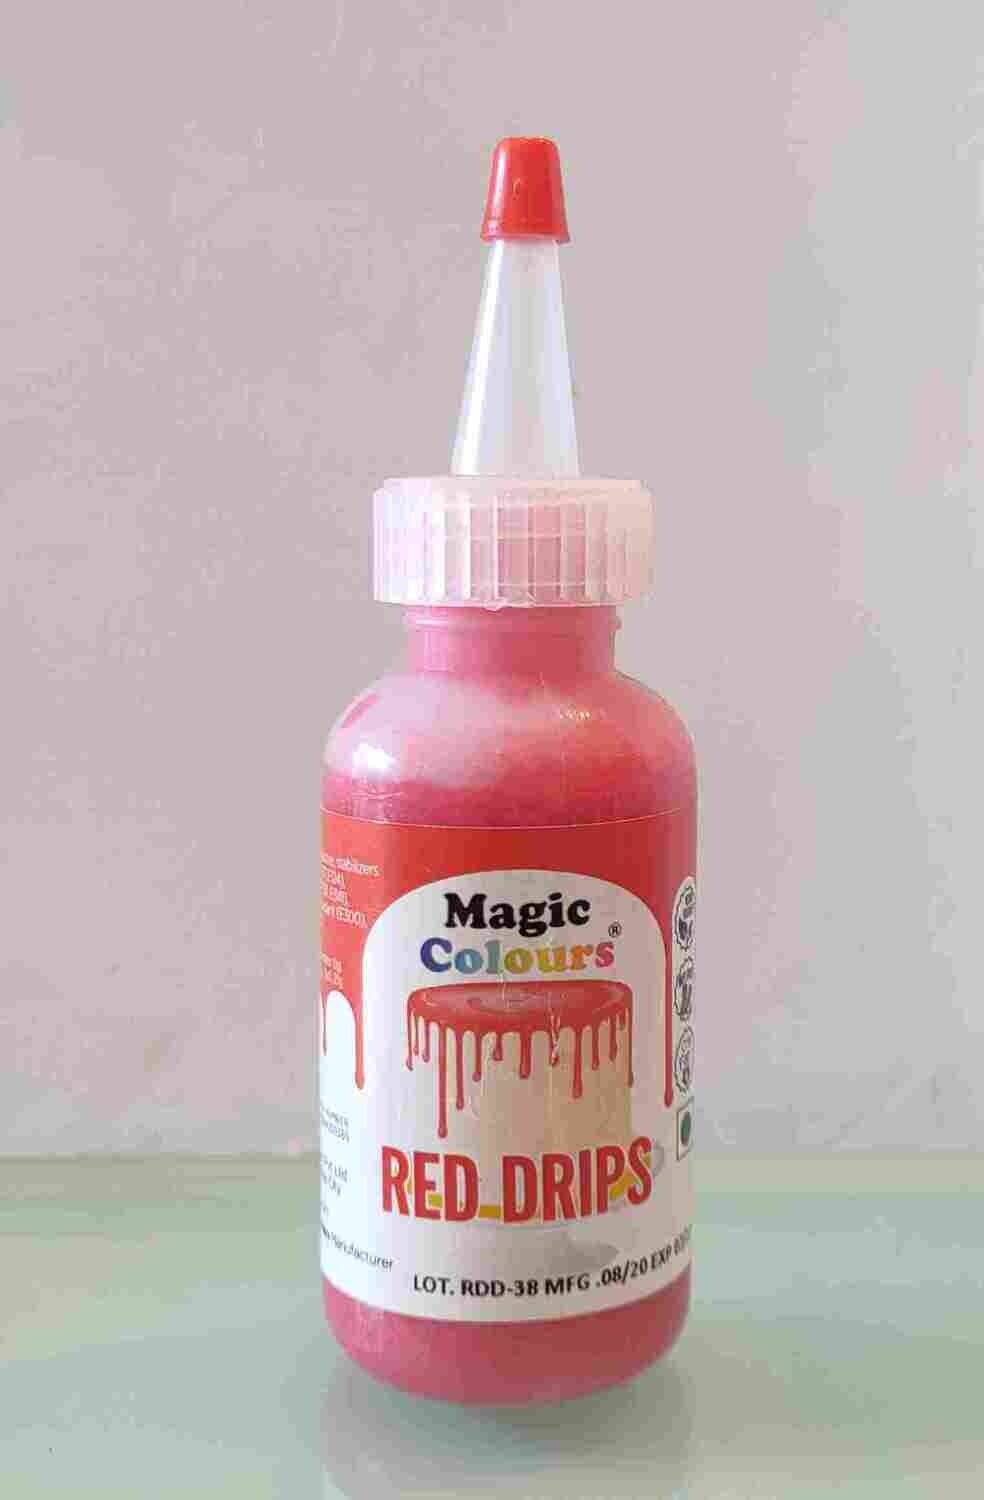 Magic Colours Red Drips 100g